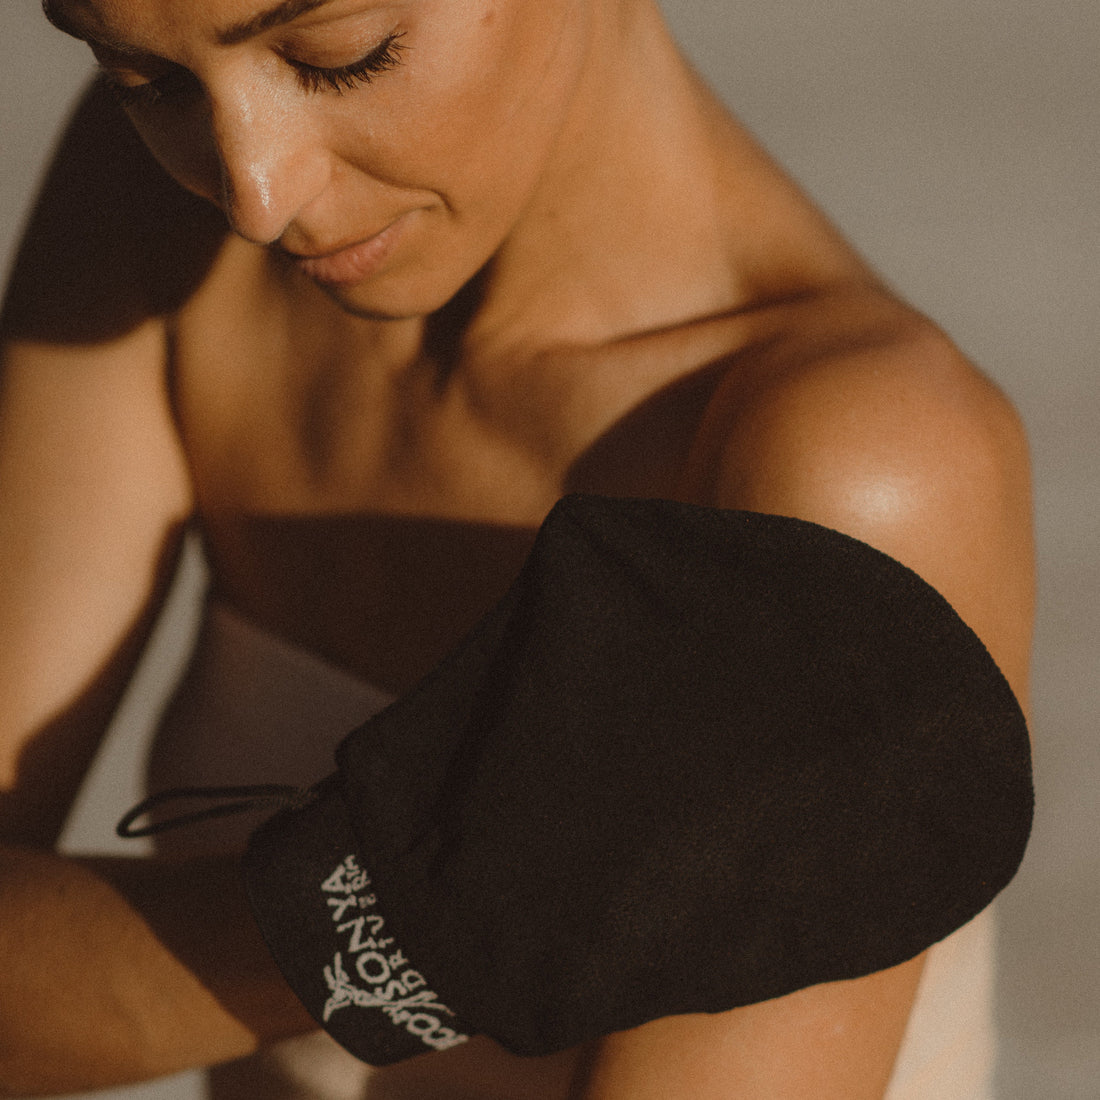 ECO by SONYA double-sided self-tanning glove